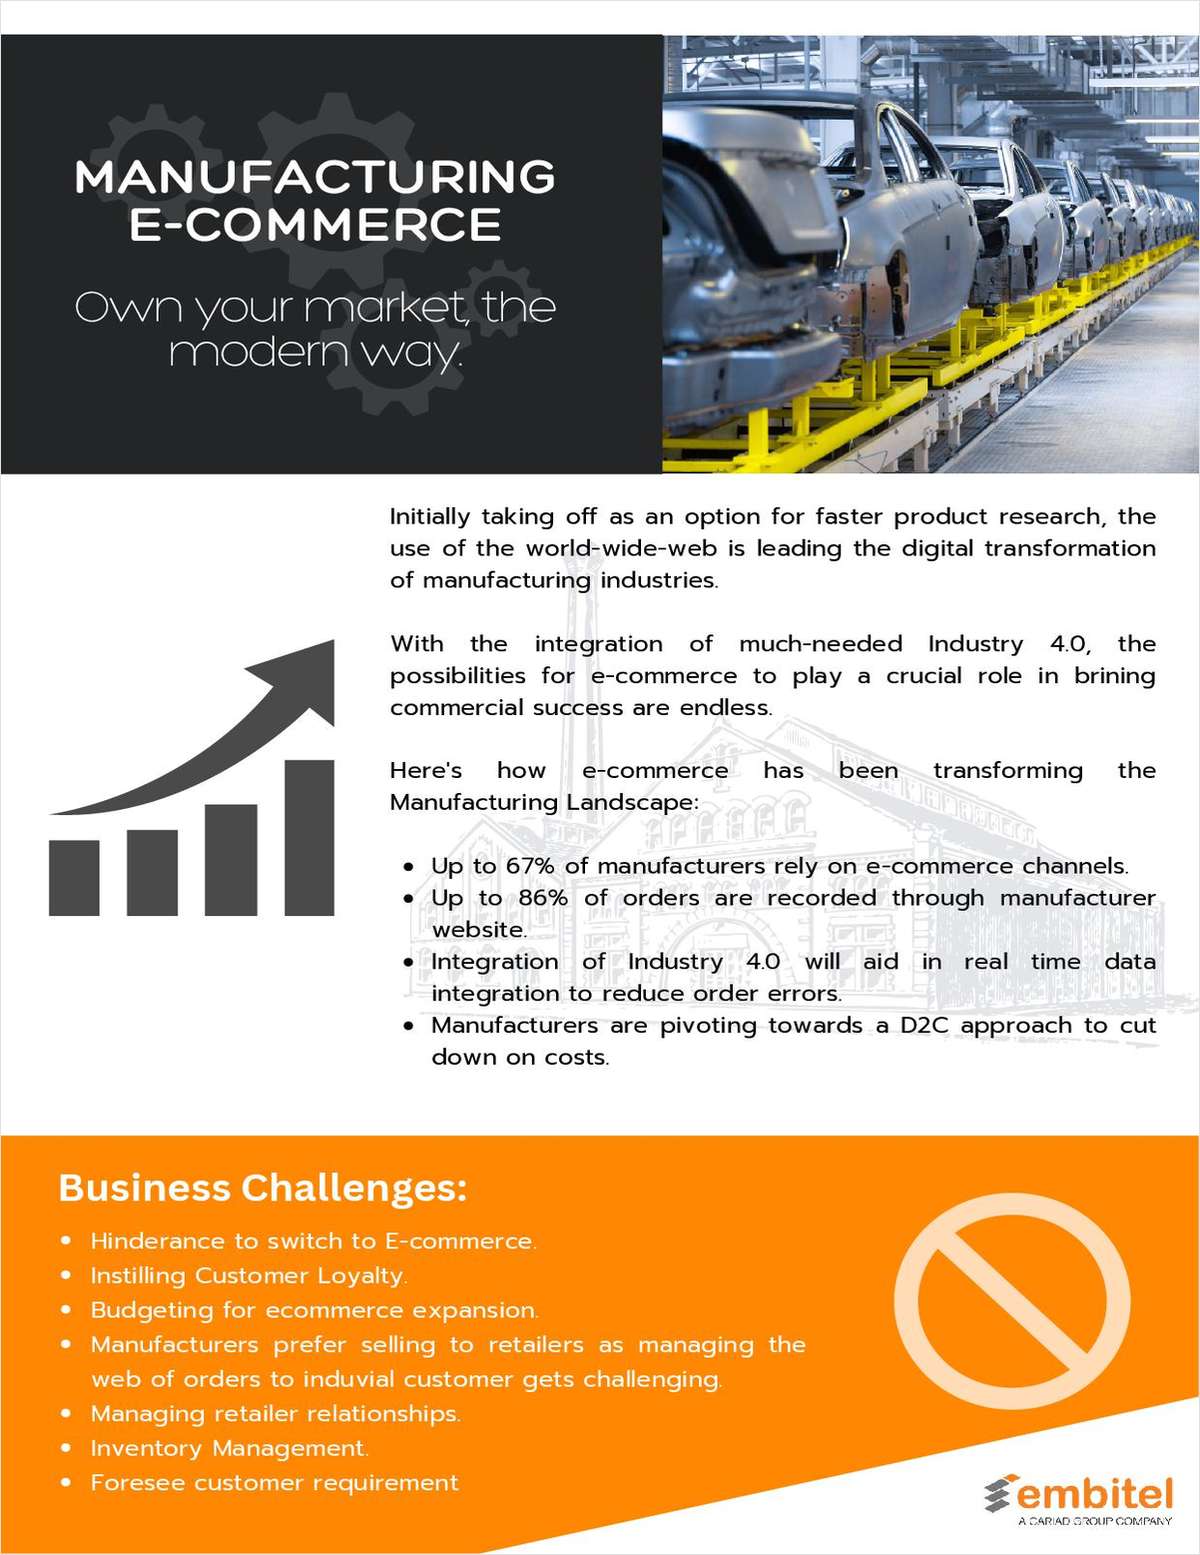 Manufacturing E-commerce: Own Your Market the Modern Way